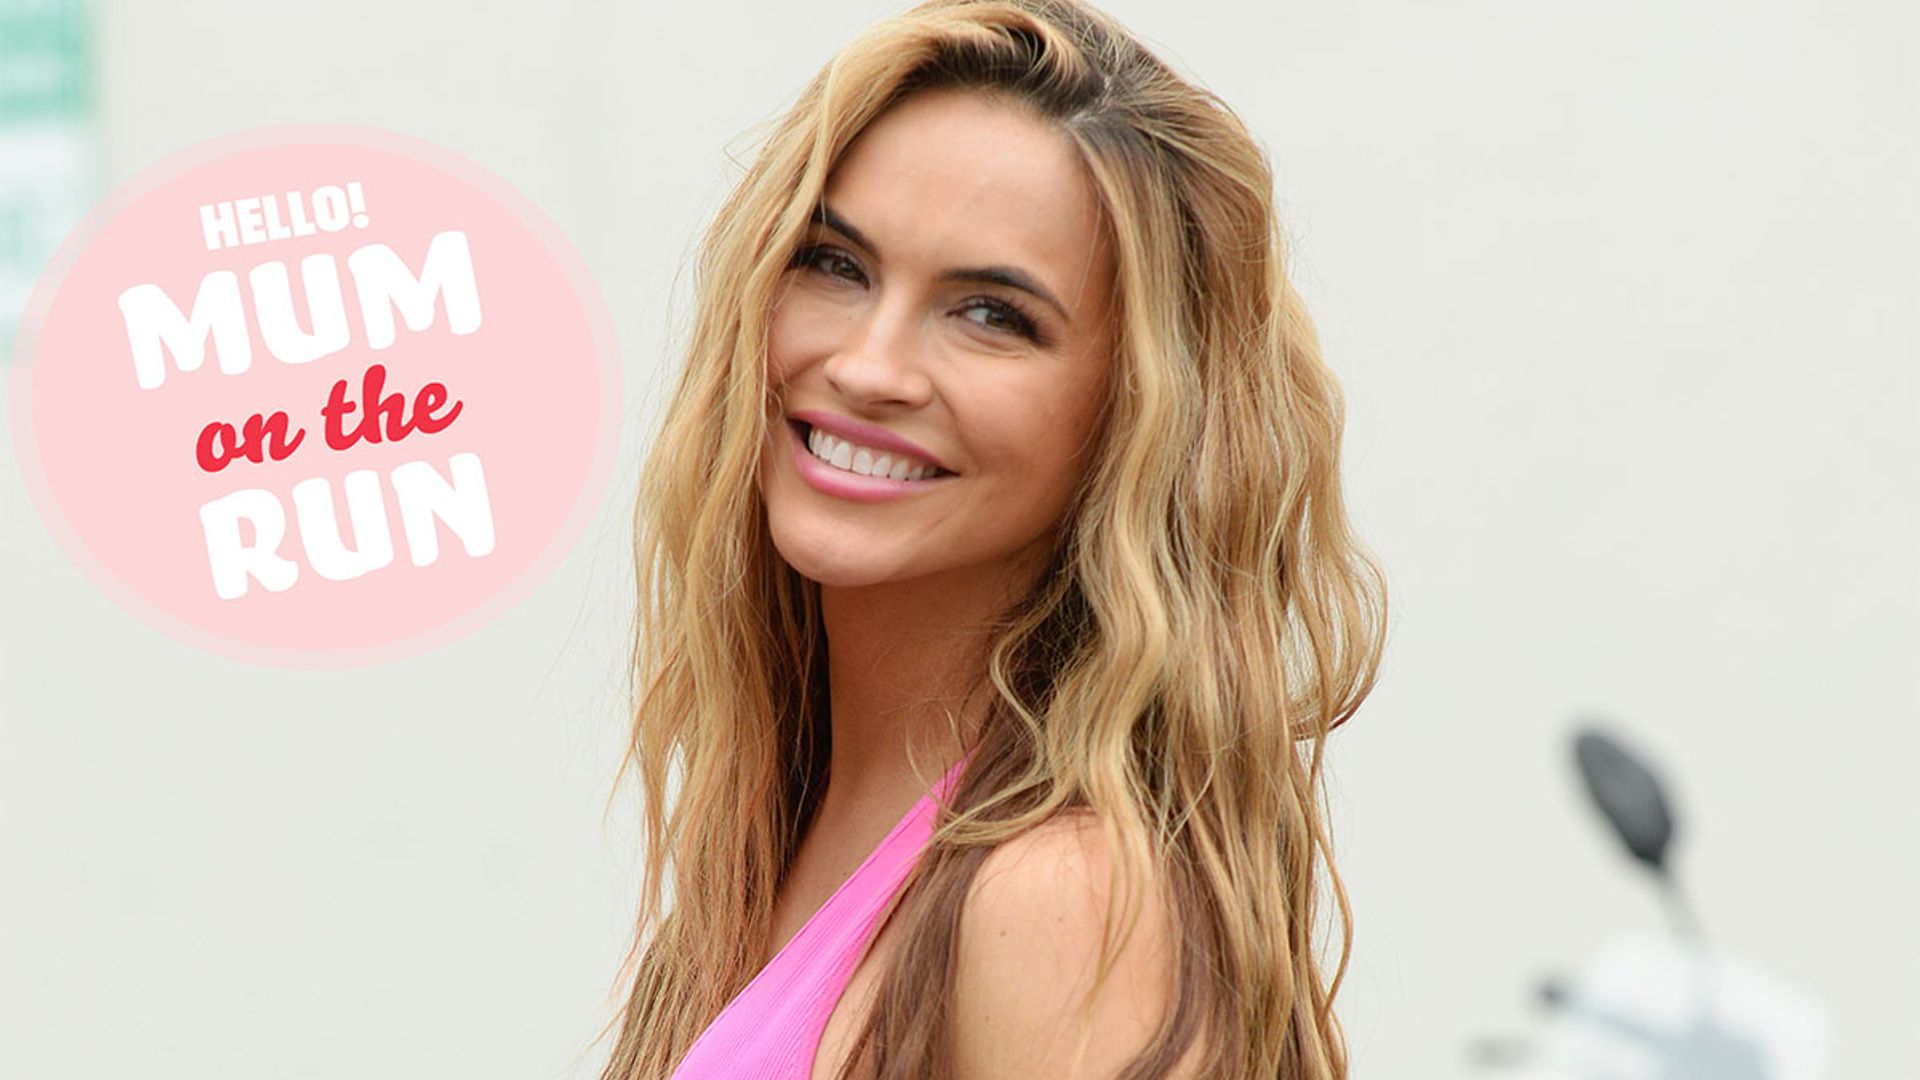 HELLO! Mum on the Run: I tried Chrishell Stause's makeup buys and this is what I thought